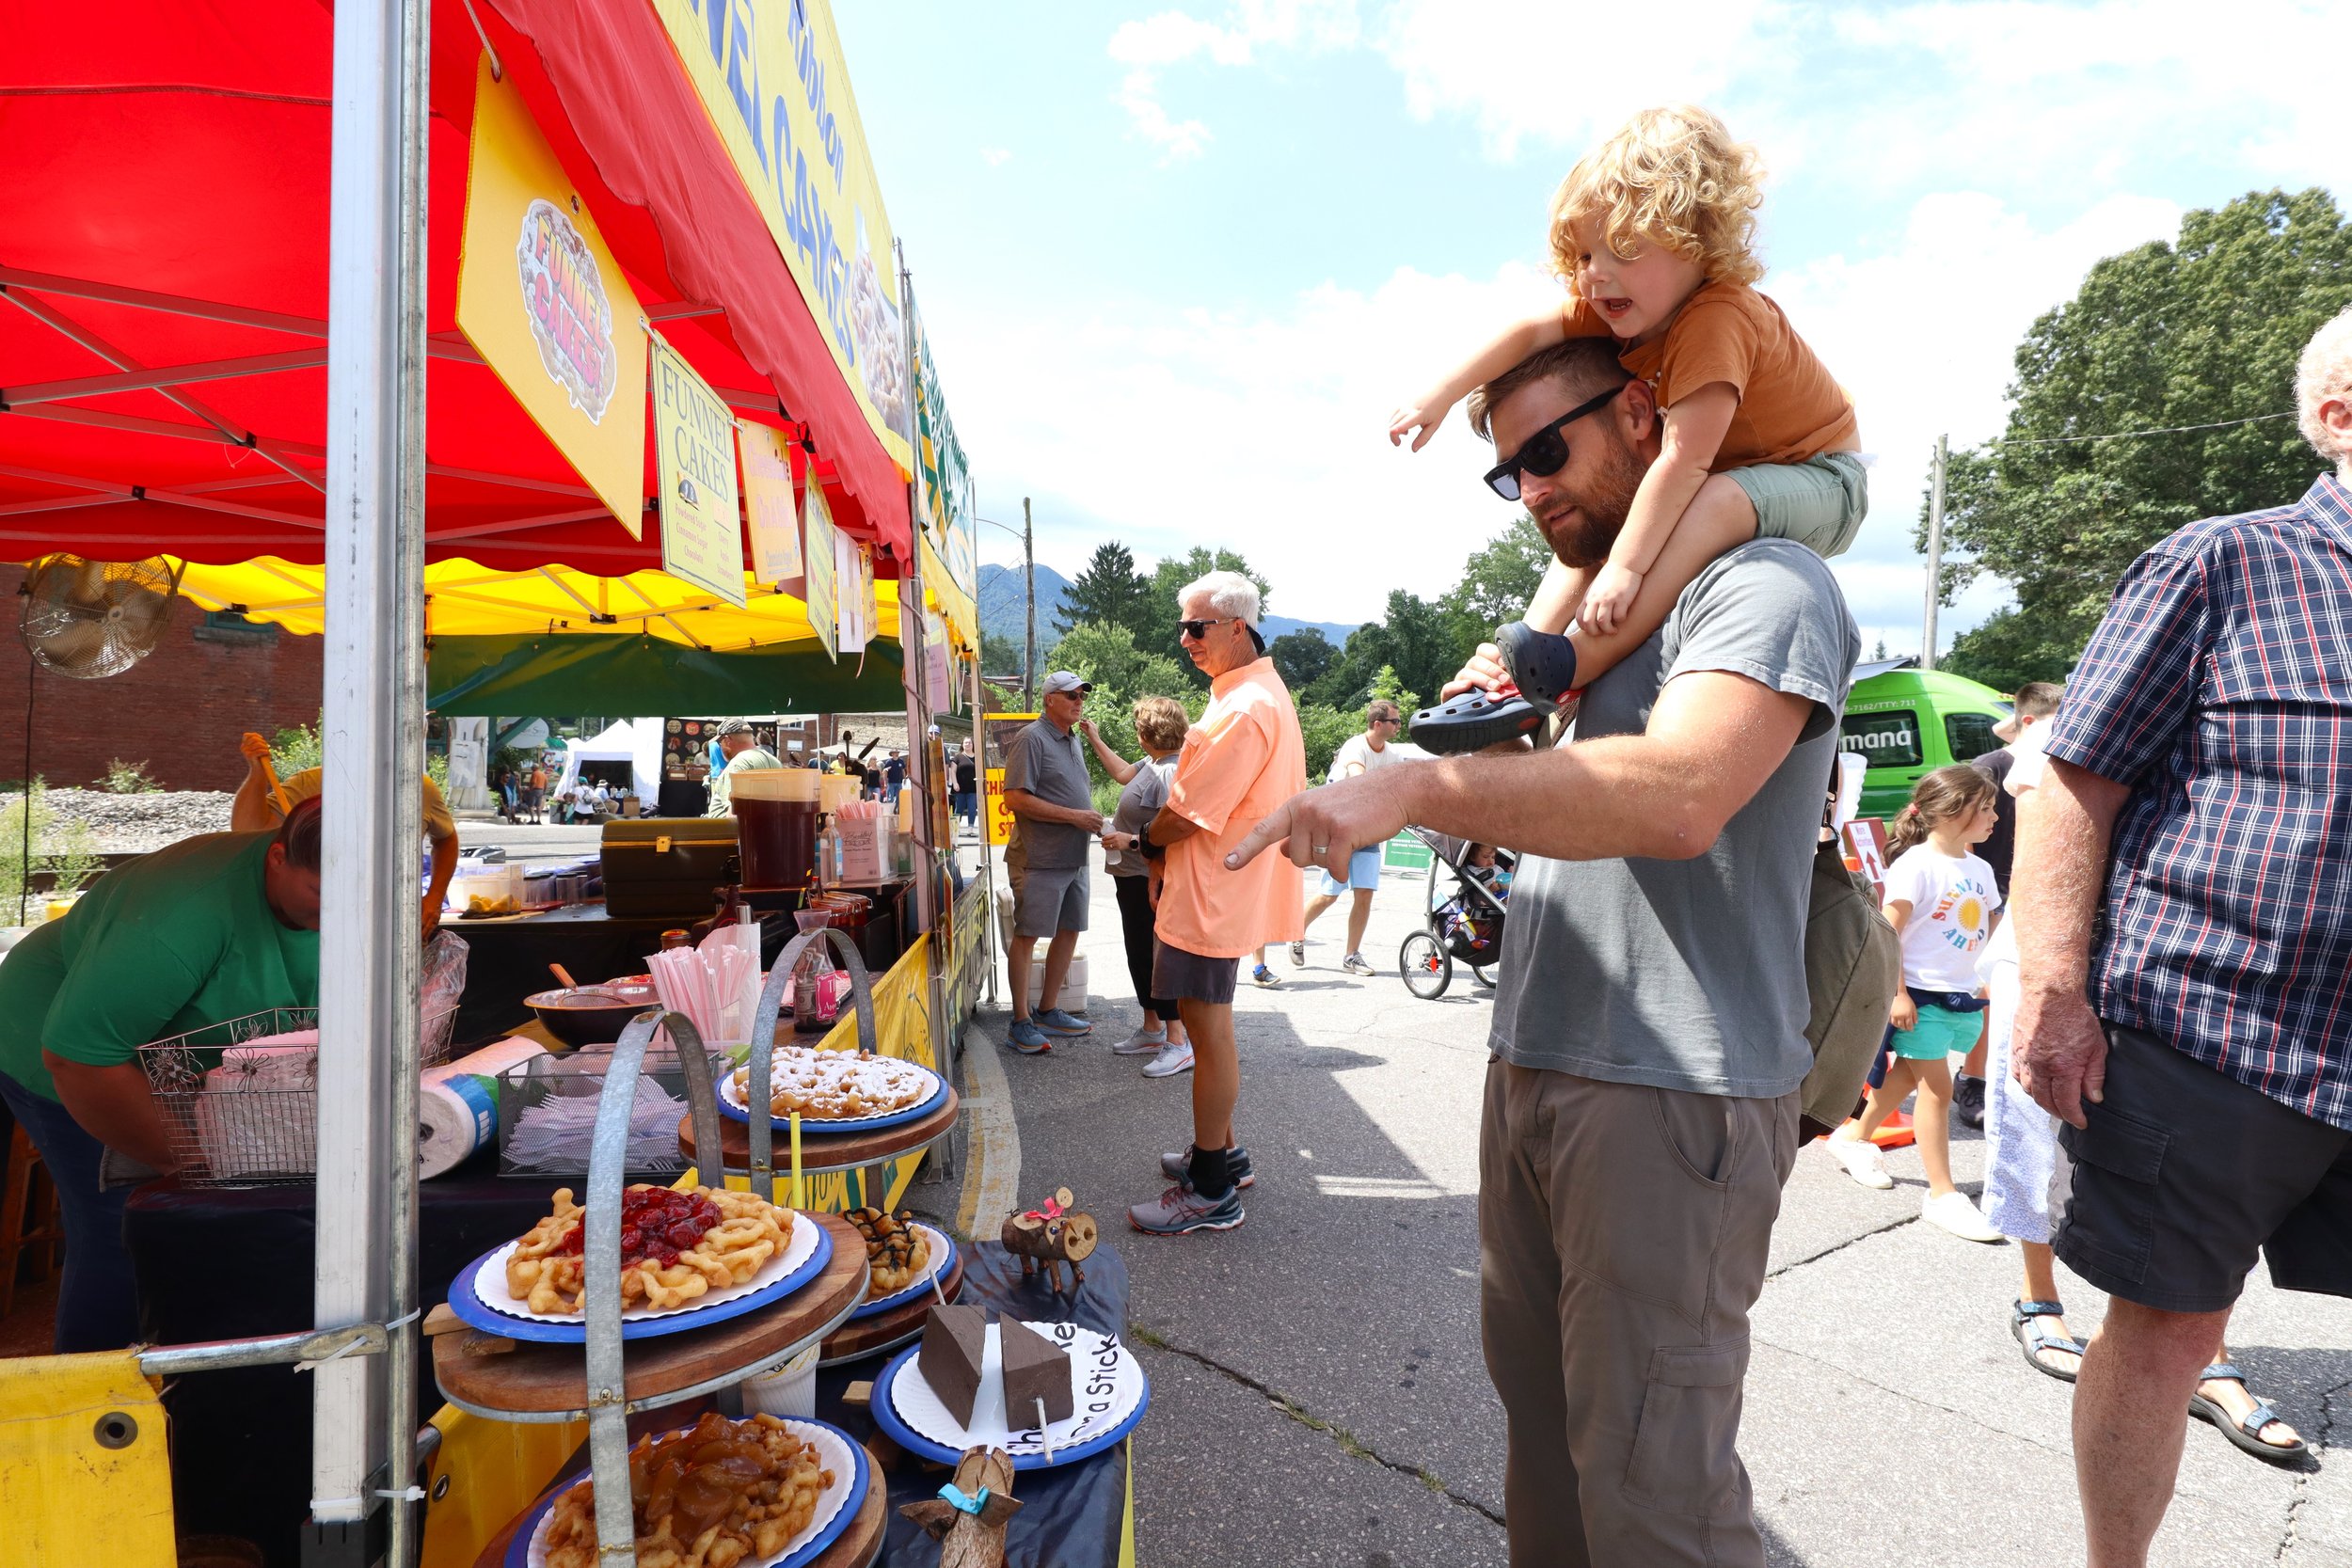 Sourwood Festival brings food, fun and familyfriendly vibe downtown